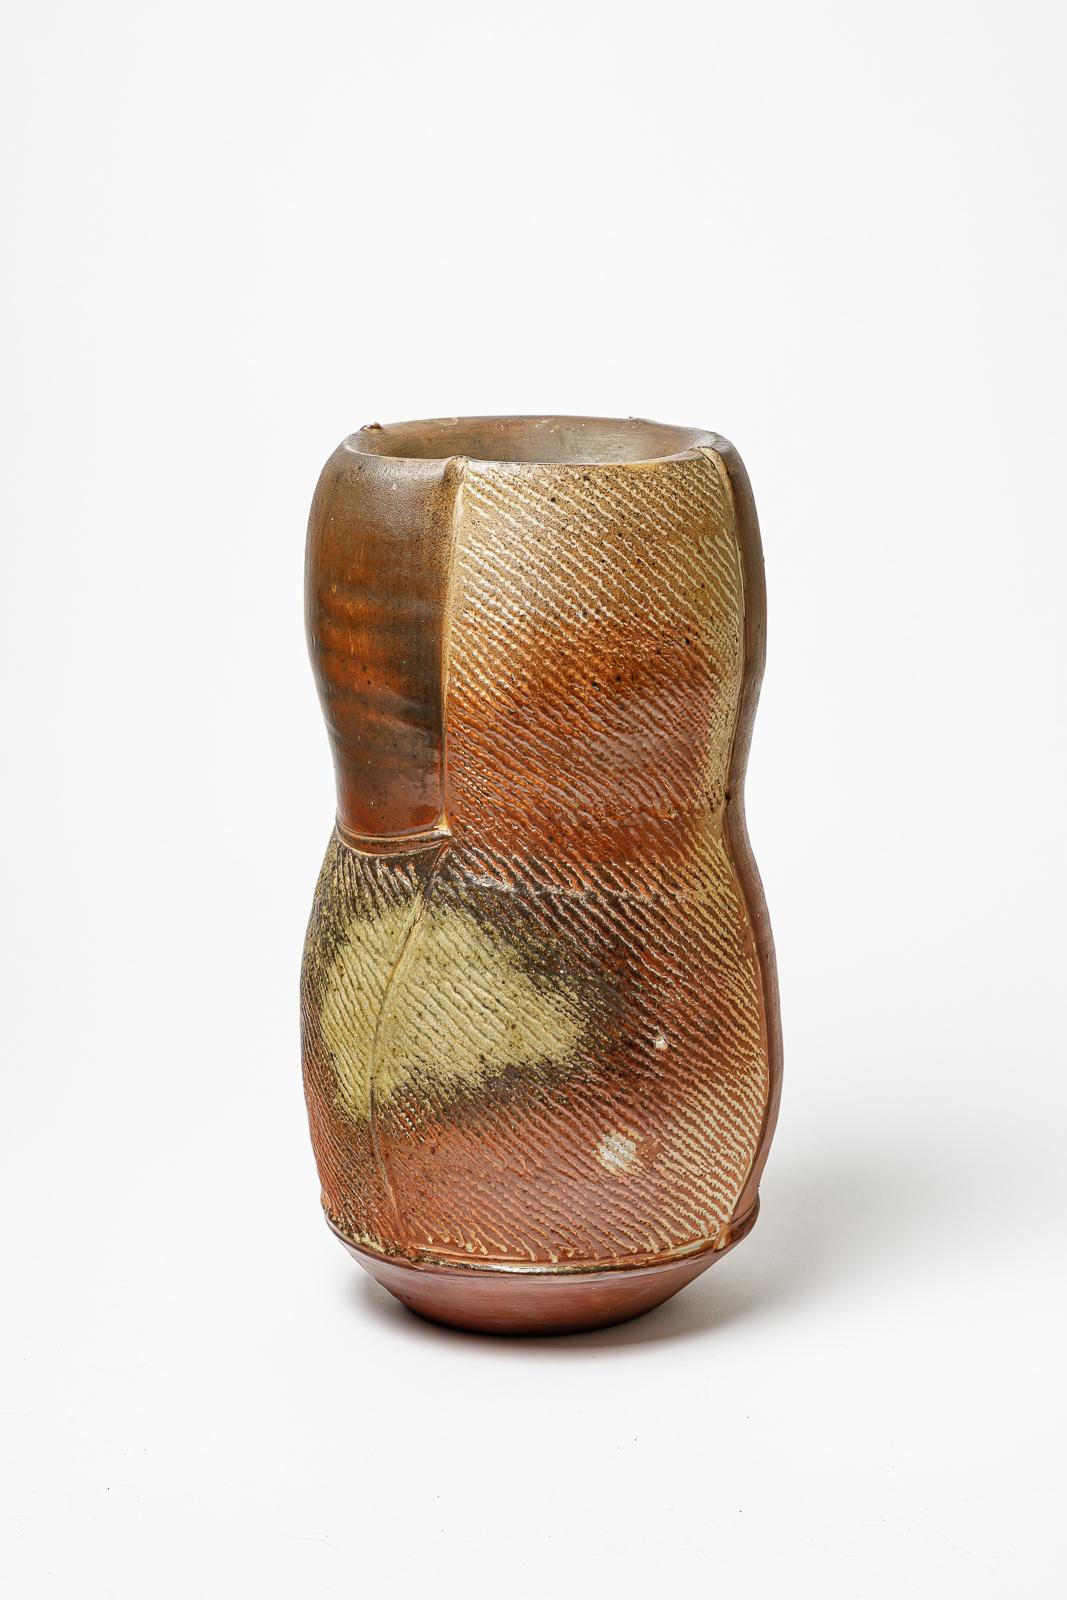 Woodfired ceramic vase by Eric Astoul.
Artist monogram under the base. Circa 1990.
H : 15.7’ x 7.5’ x 6.7’ inches.